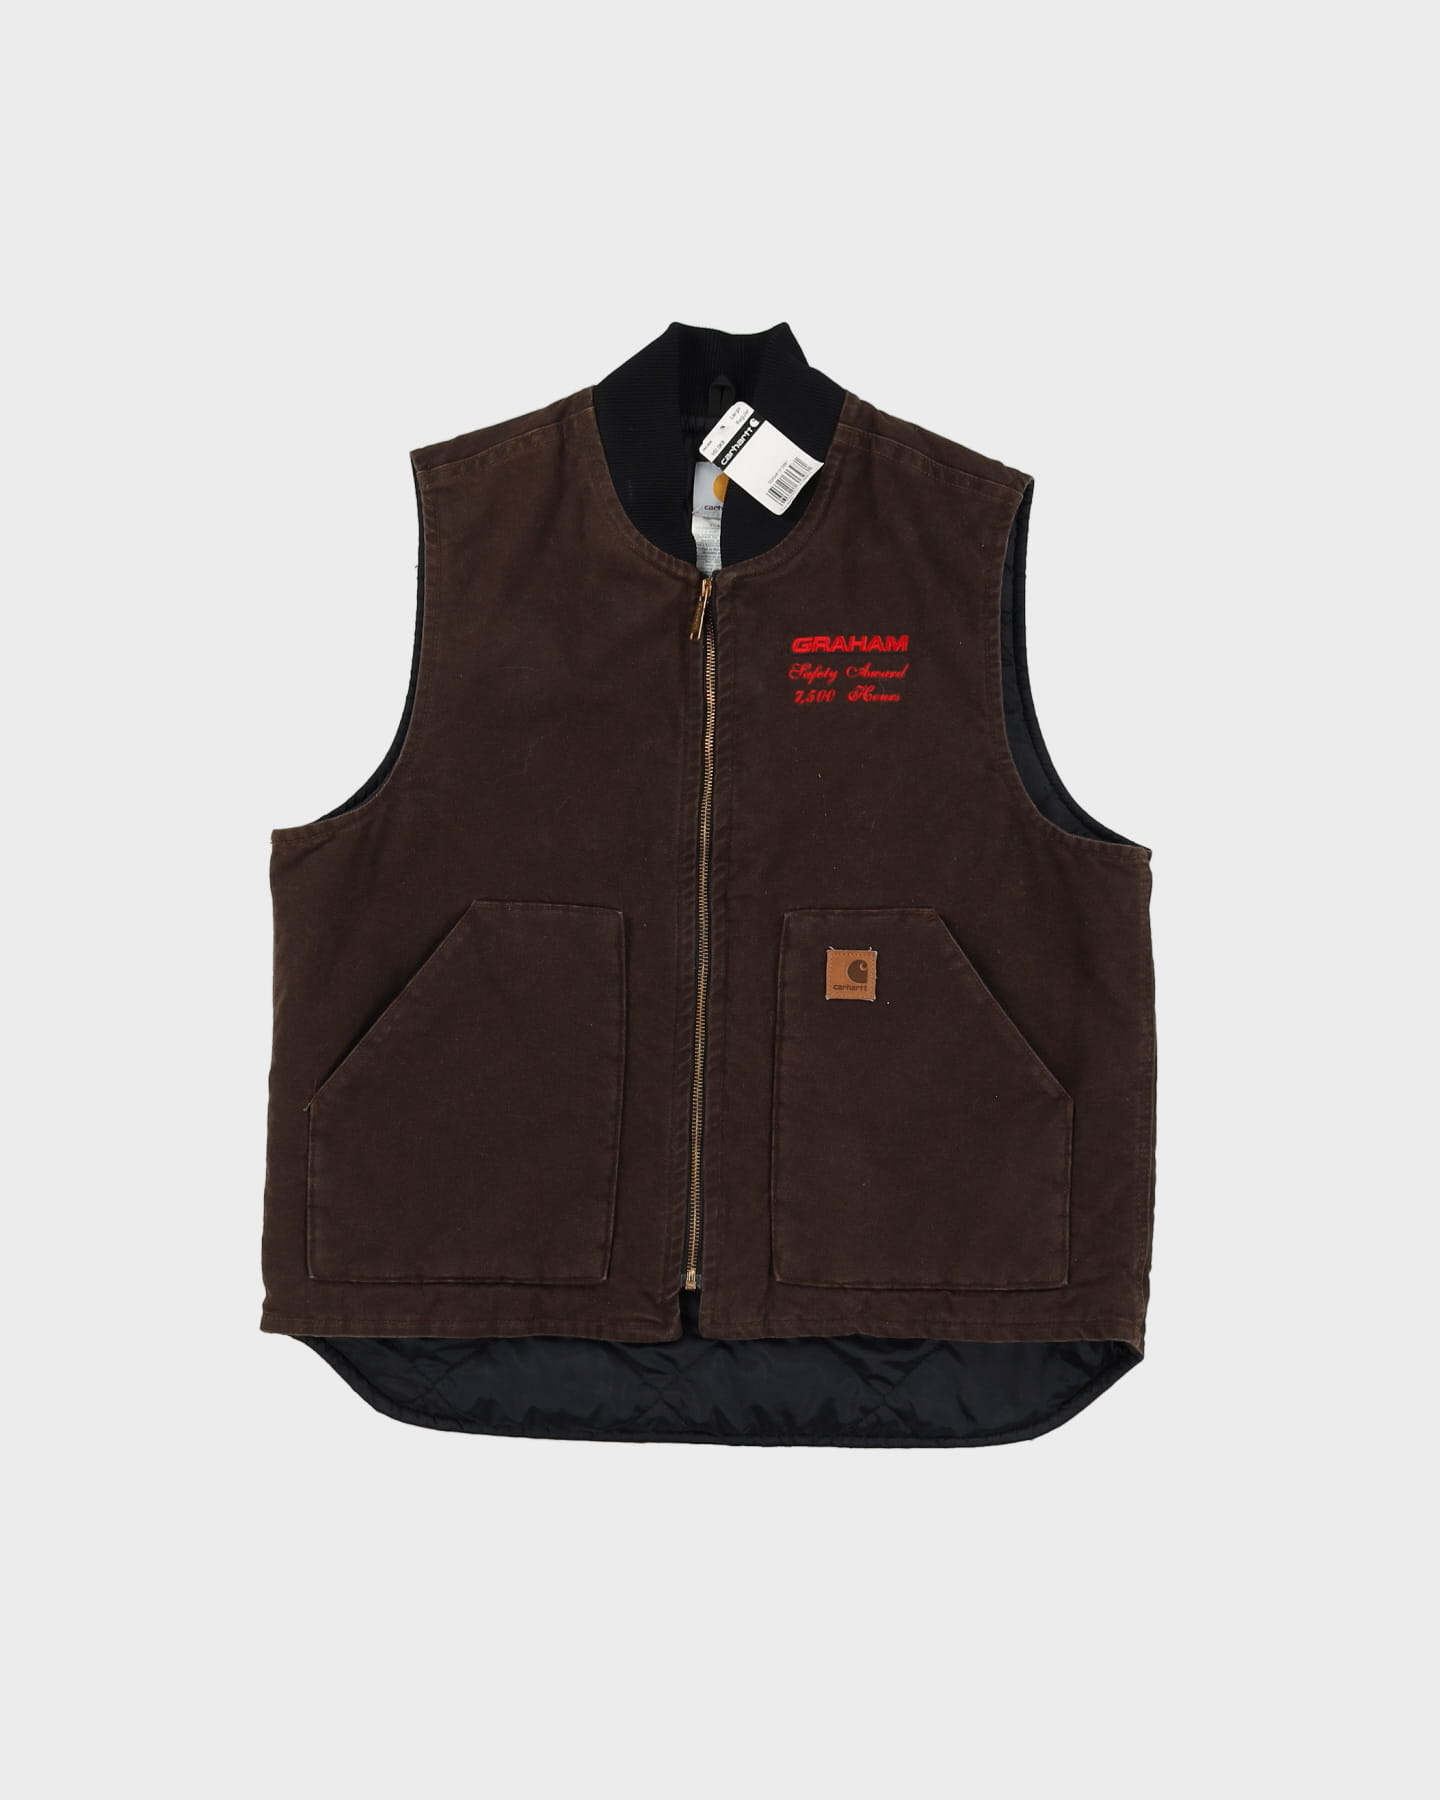 New With Tags 00s Carhartt Sleeveless Brown Workwear / Chore Gilet Jacket - L